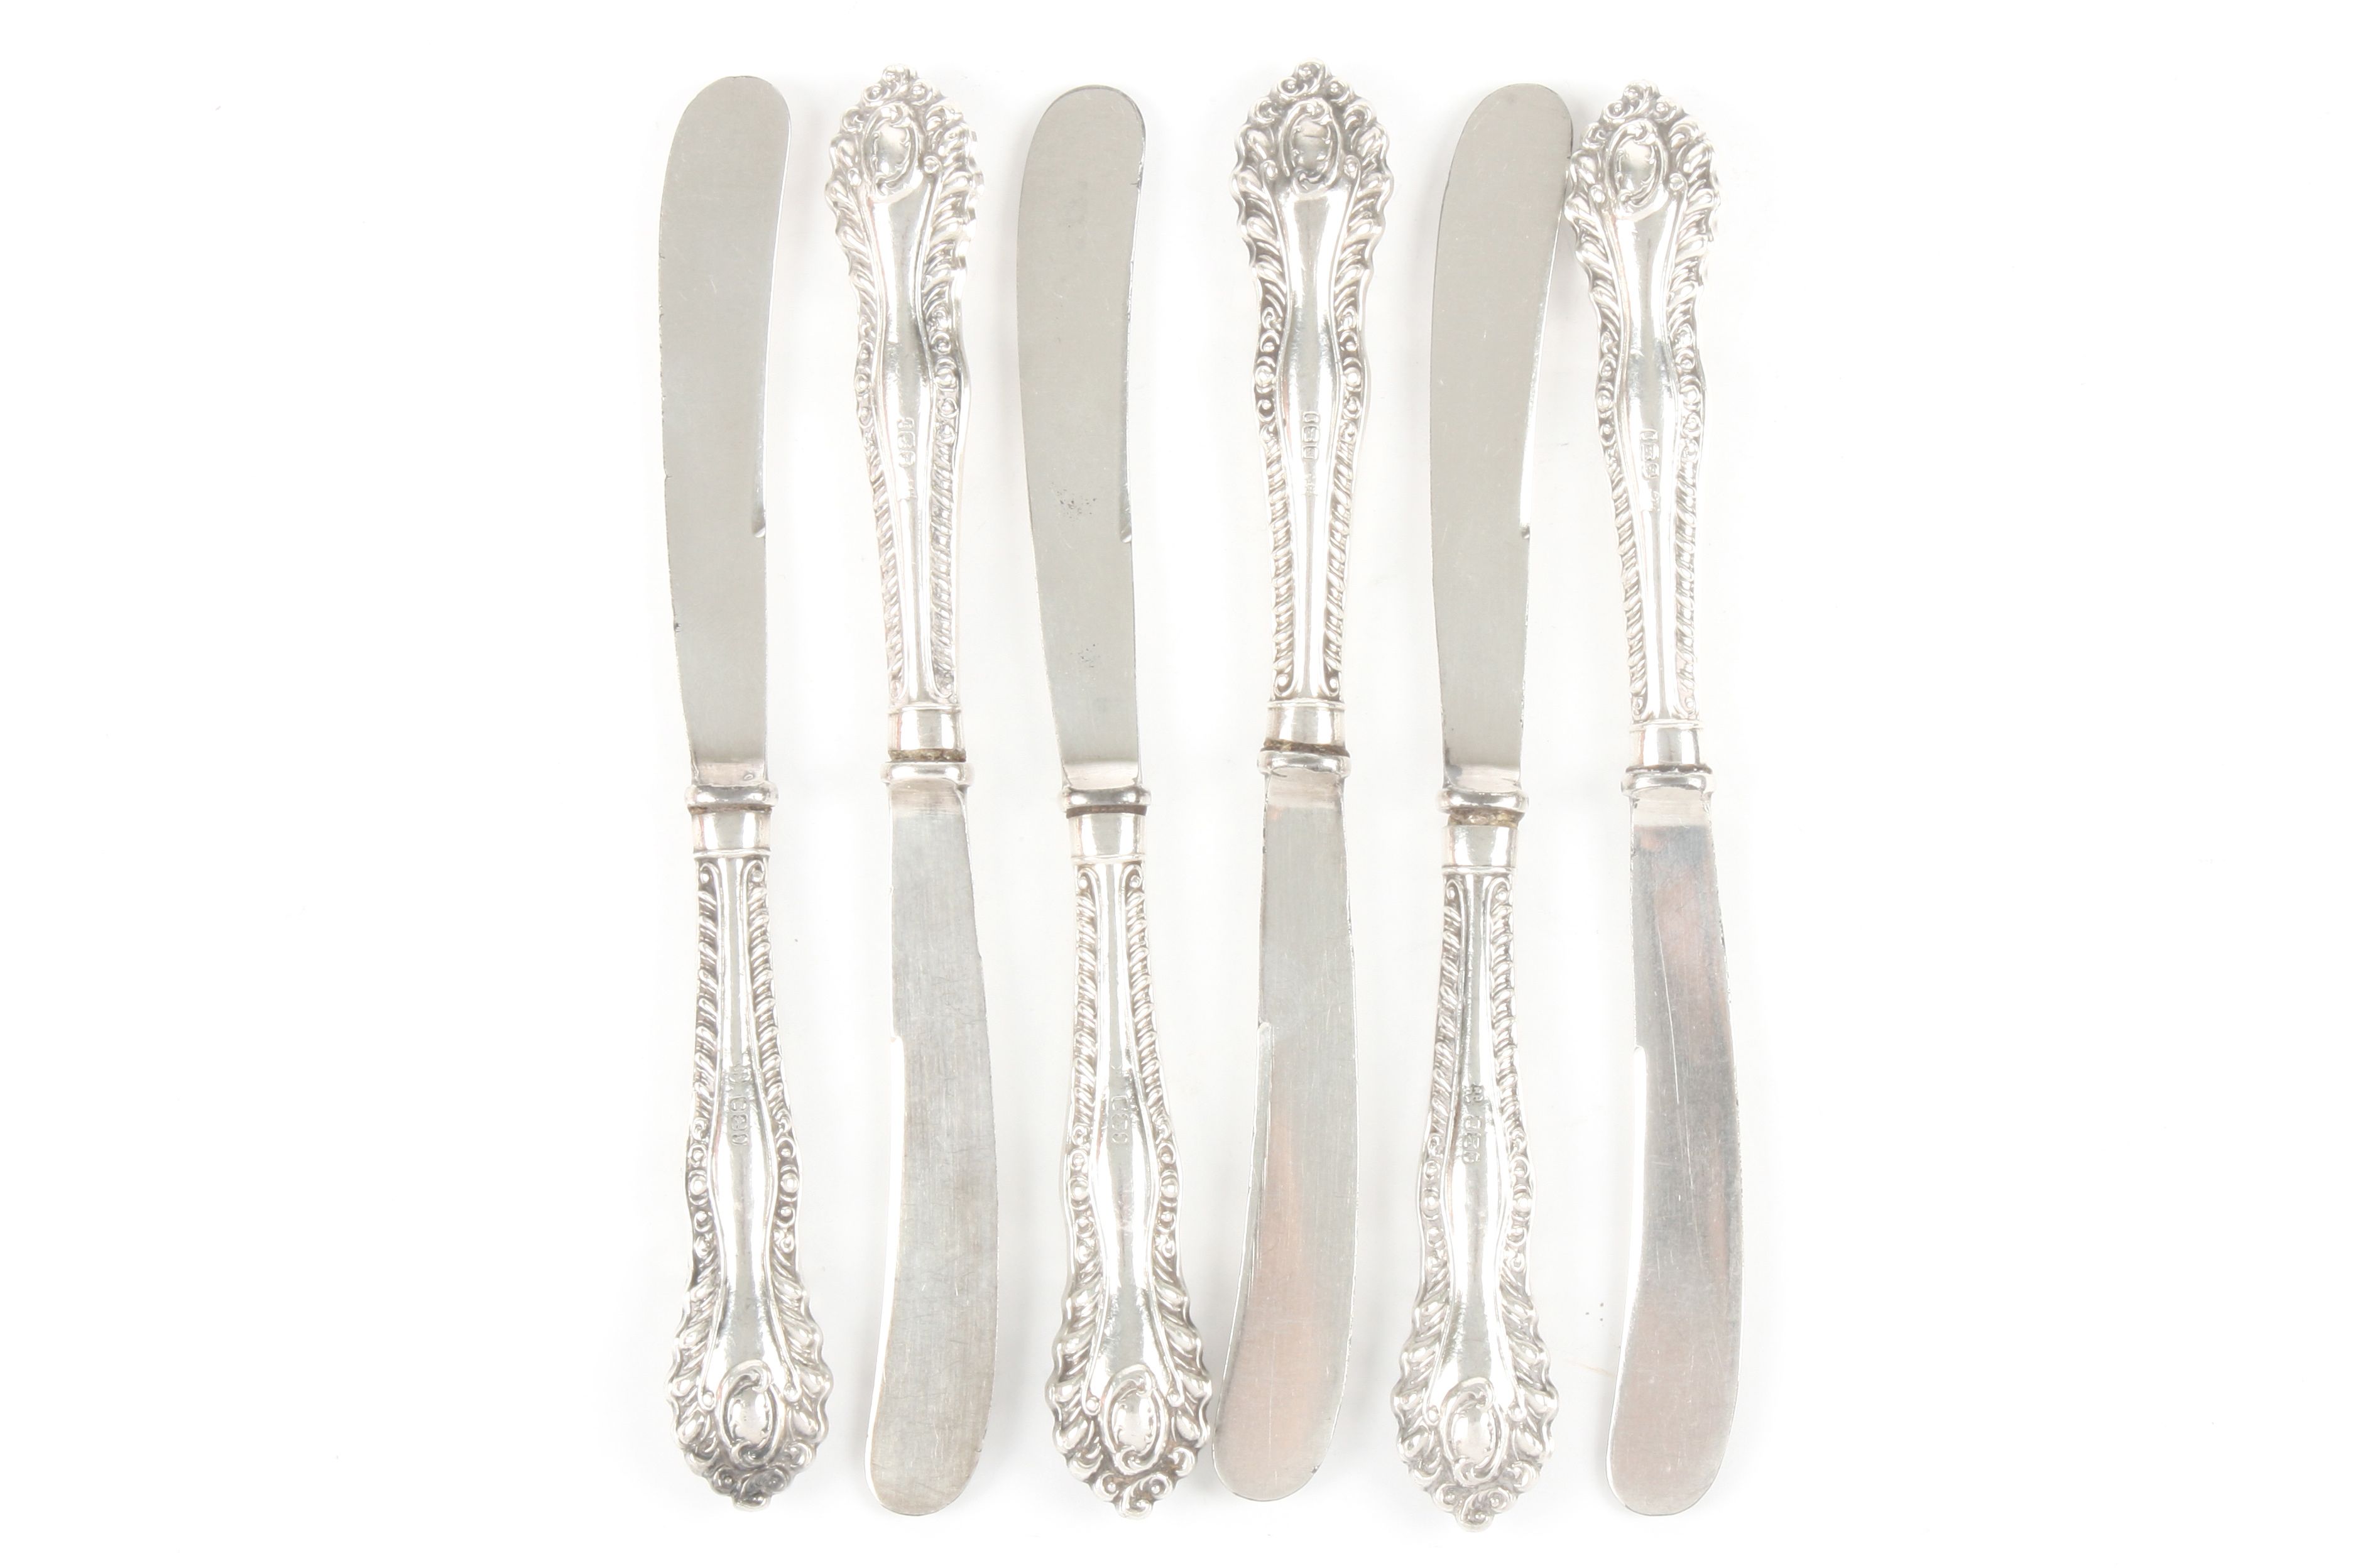 A large quantity of silver plated flat wear and a set of silver handled butter knives, early 20th